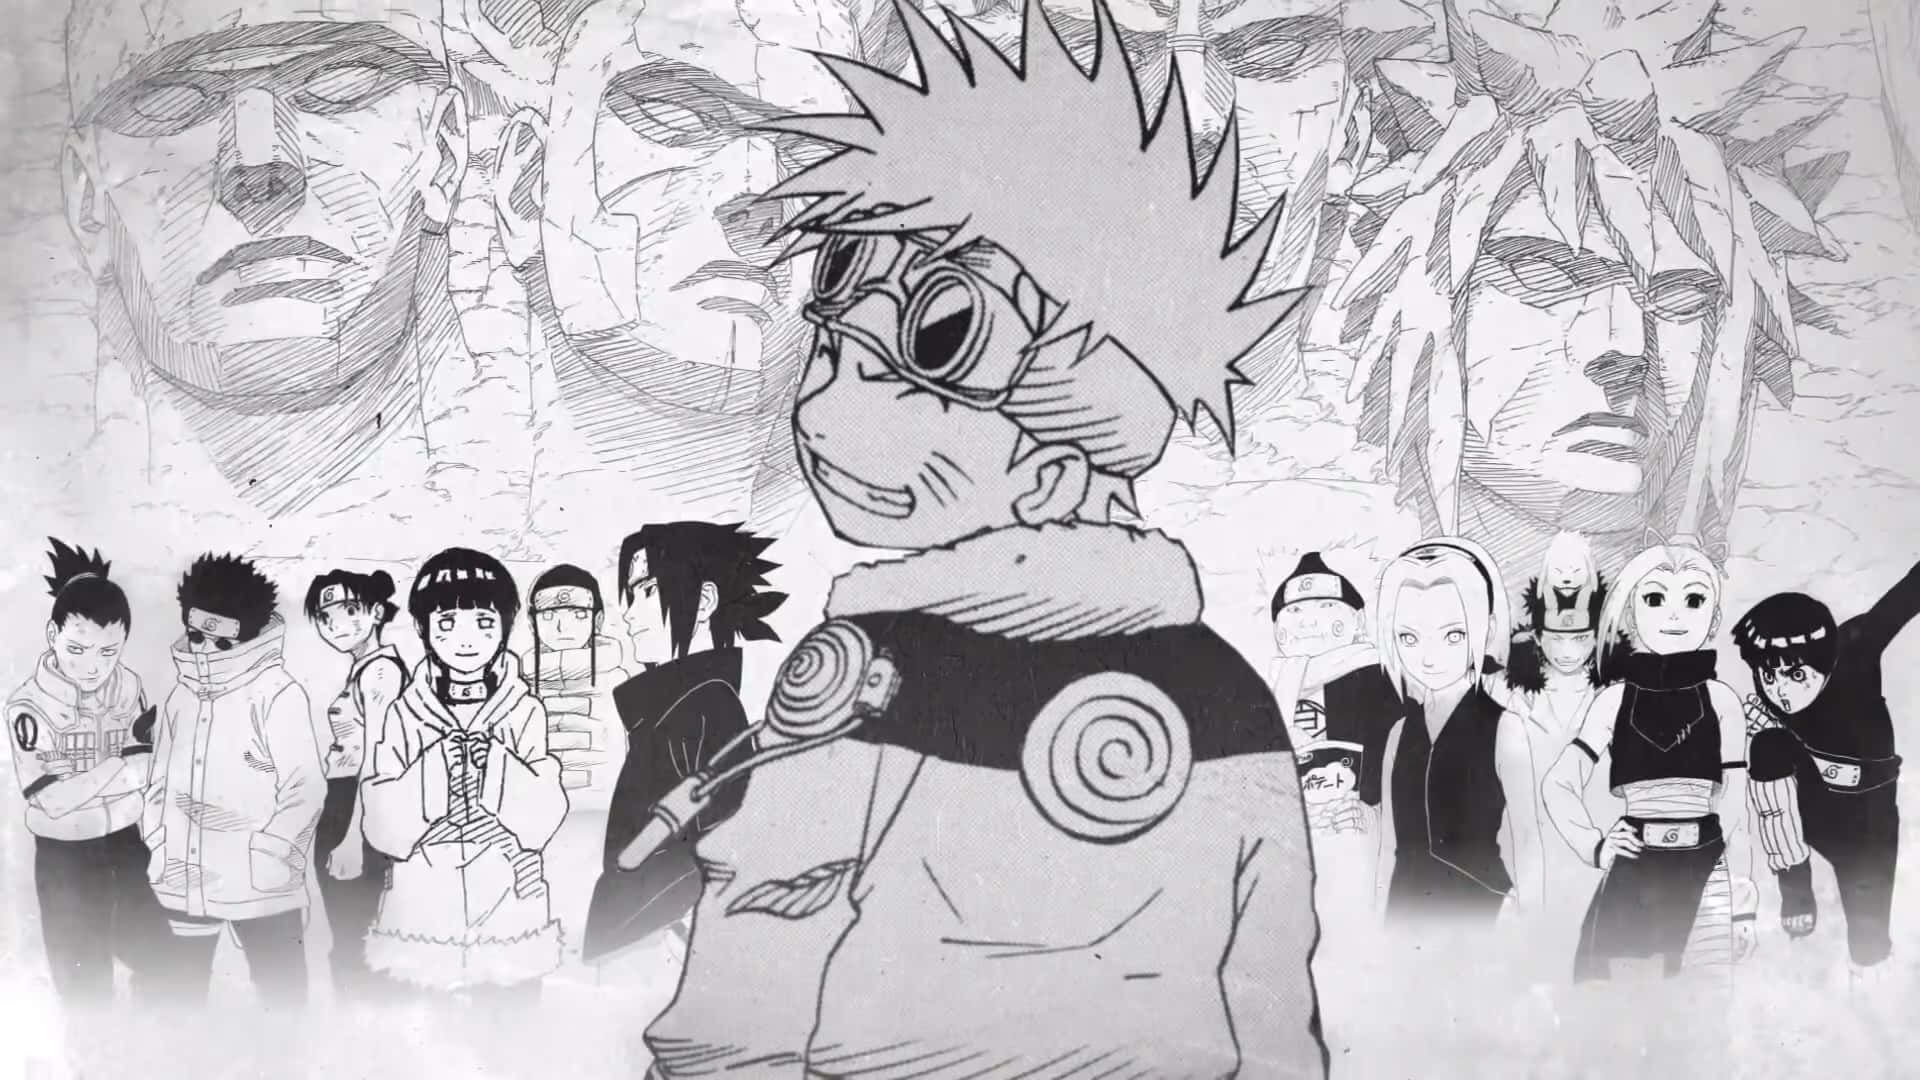 Uzumaki Naruto and his allies joining forces to become the ultimate ninja dream team